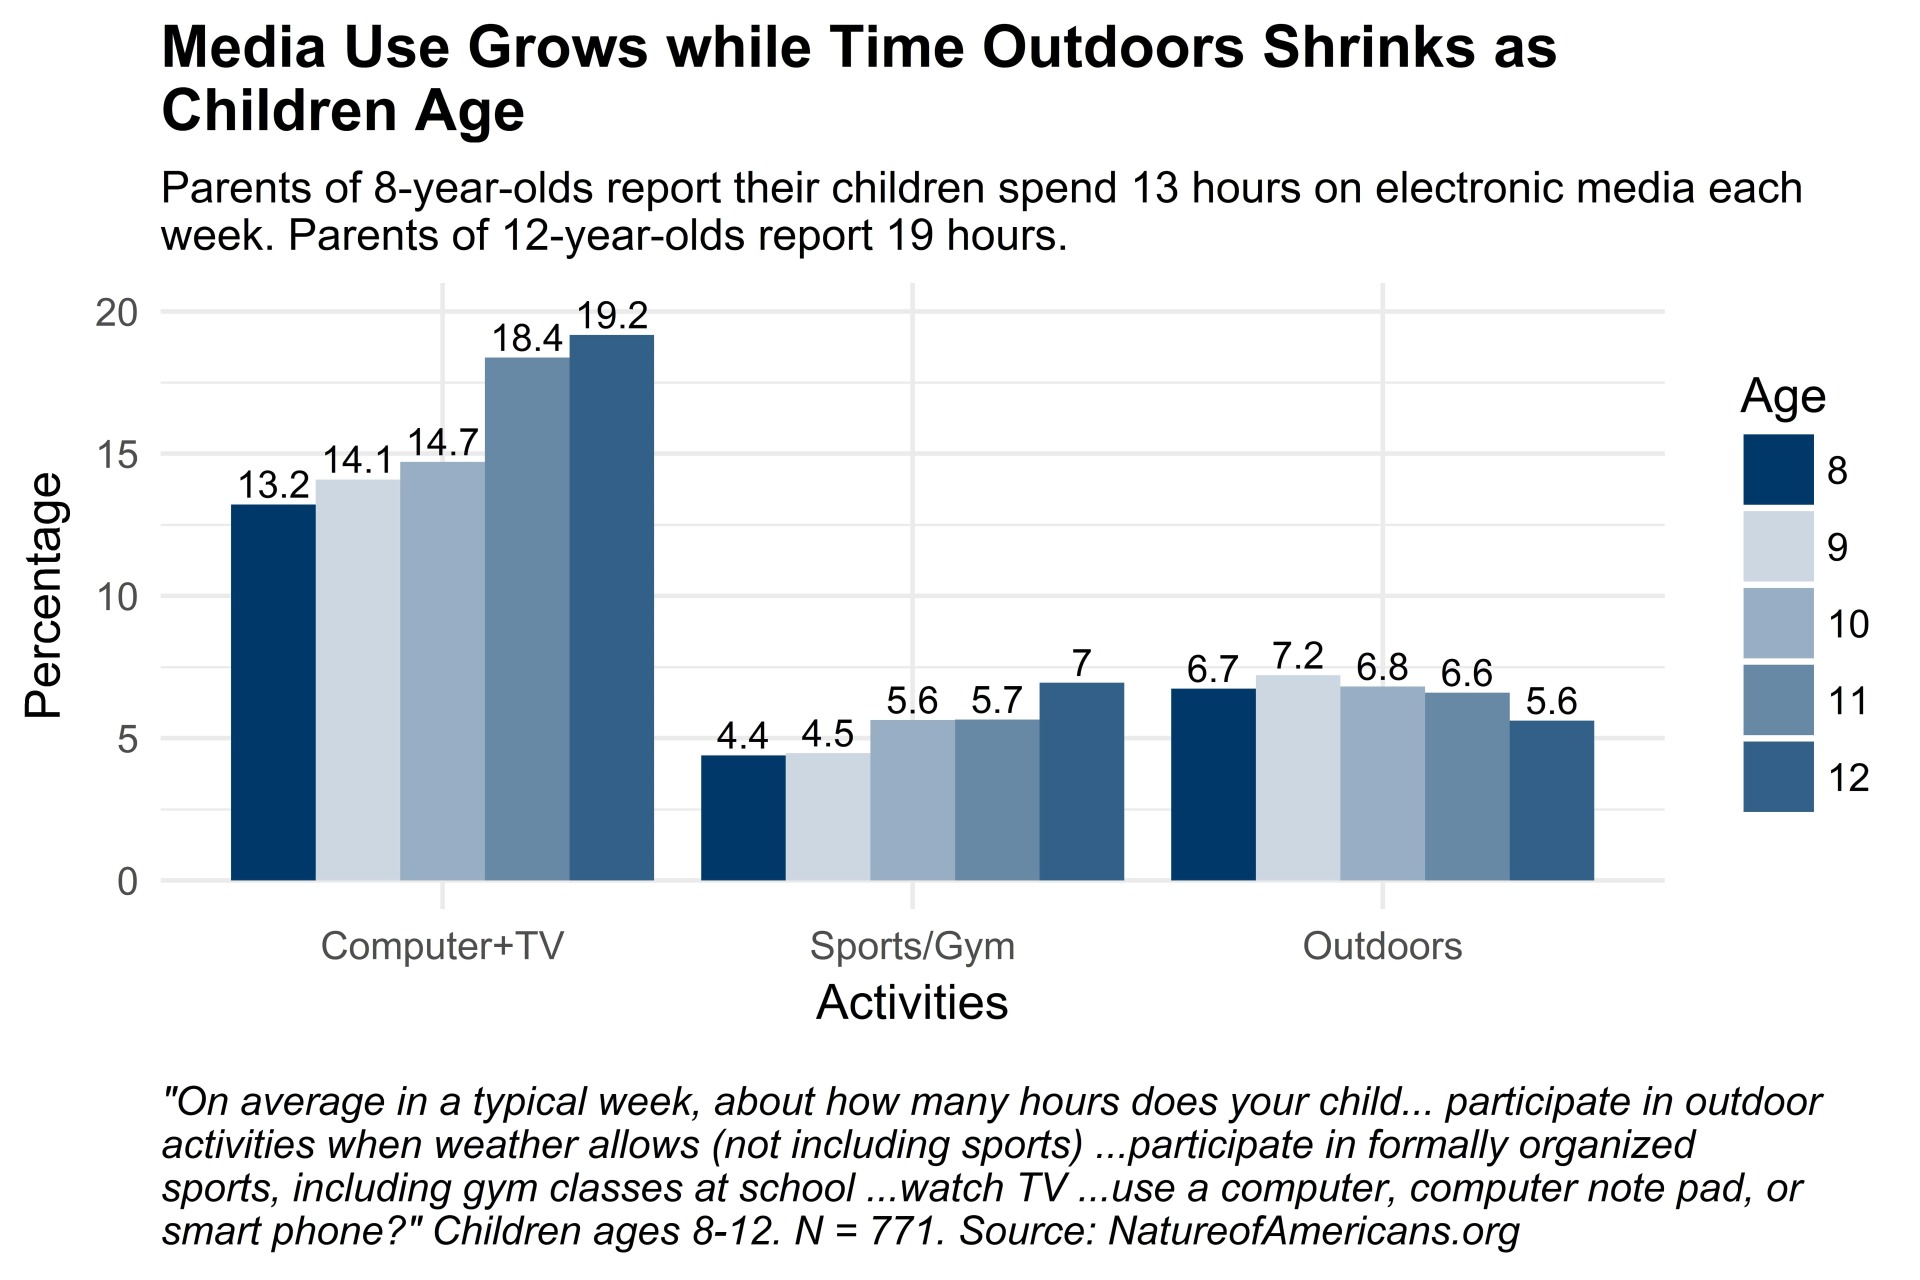 Graph of media usage among children in the U.S. versus time spent outdoors.